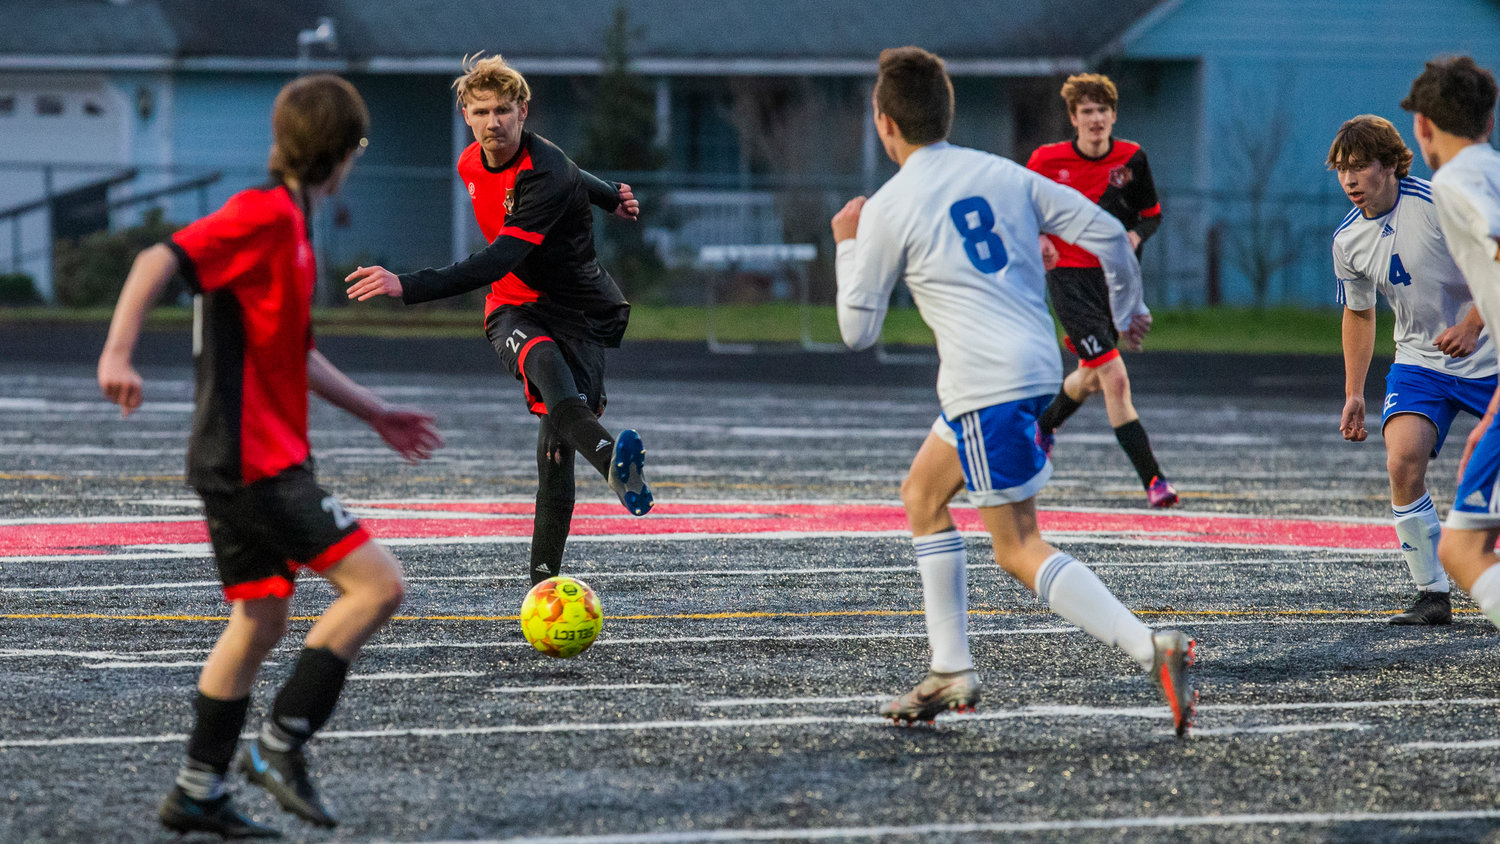 Tenino’s Max Craig (21) makes a pass during a game Wednesday evening.